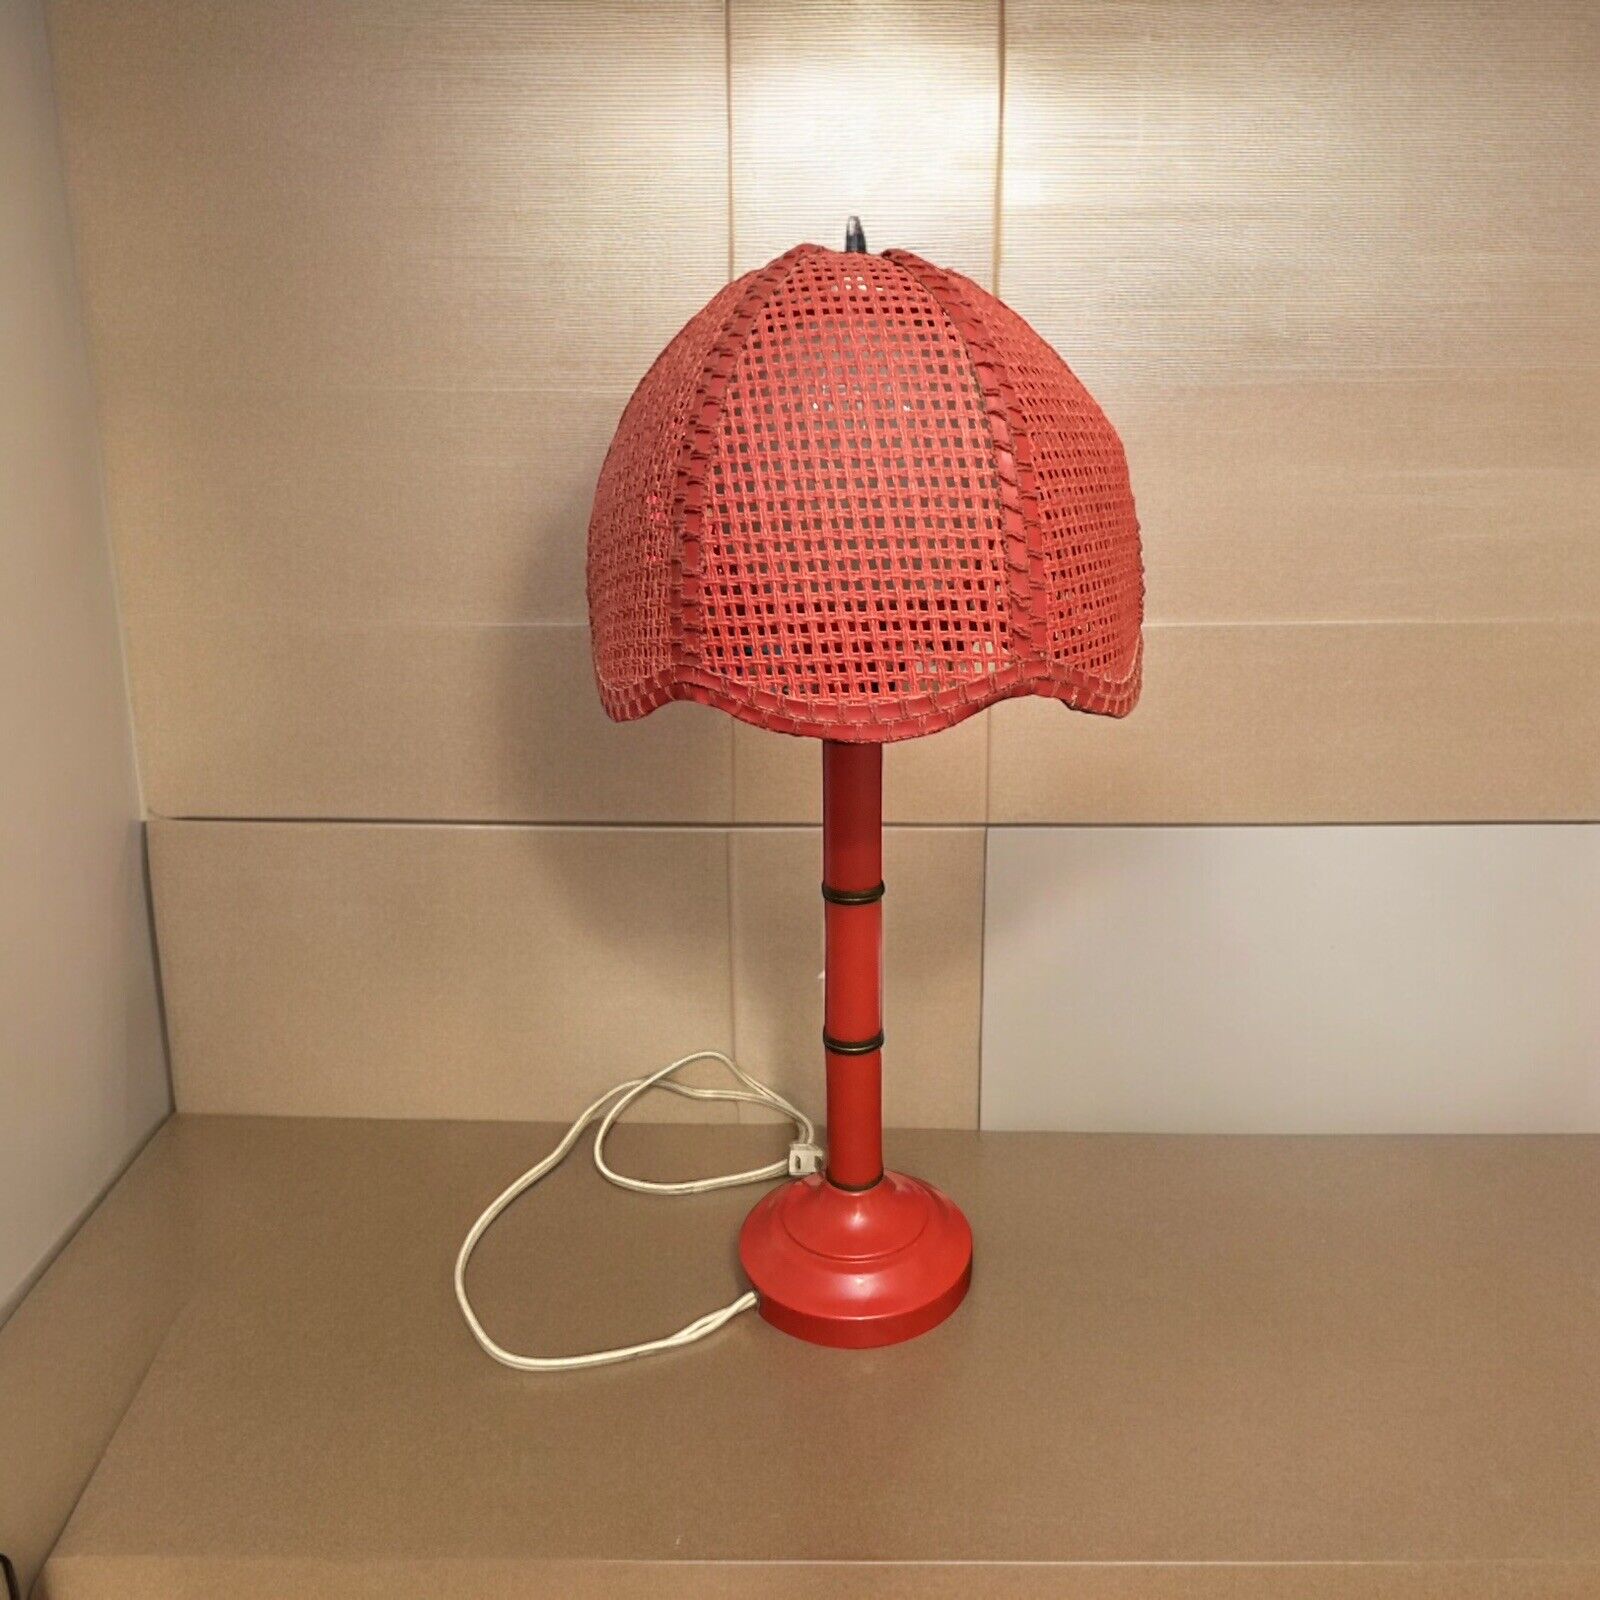 Vintage Red Table Lamp Wicker Rattan Dome Shade Amazing Bulb Amazing Rare Piece